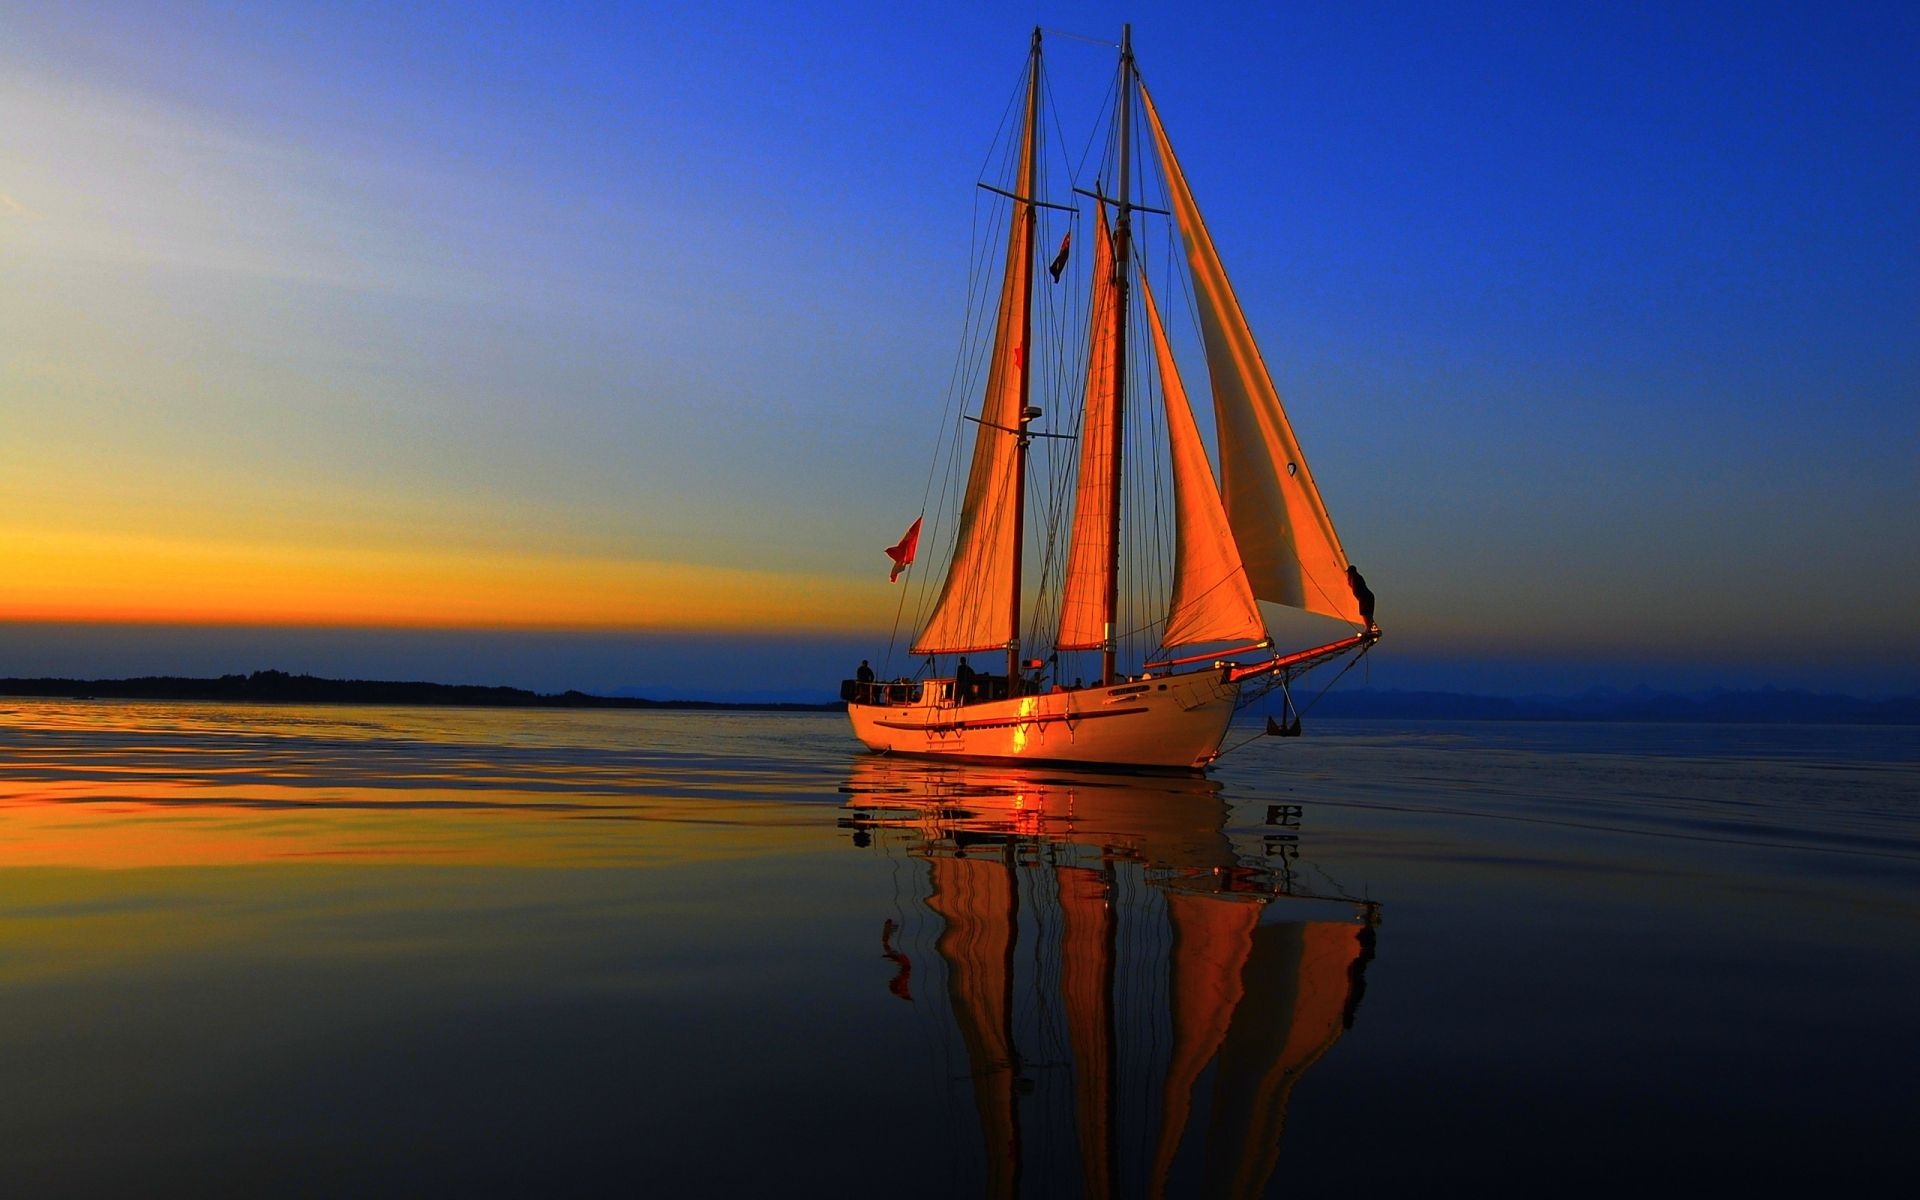 Sailing: Sunset, Boat, The activity of traveling on the water in a ship propelled by the wind. 1920x1200 HD Wallpaper.